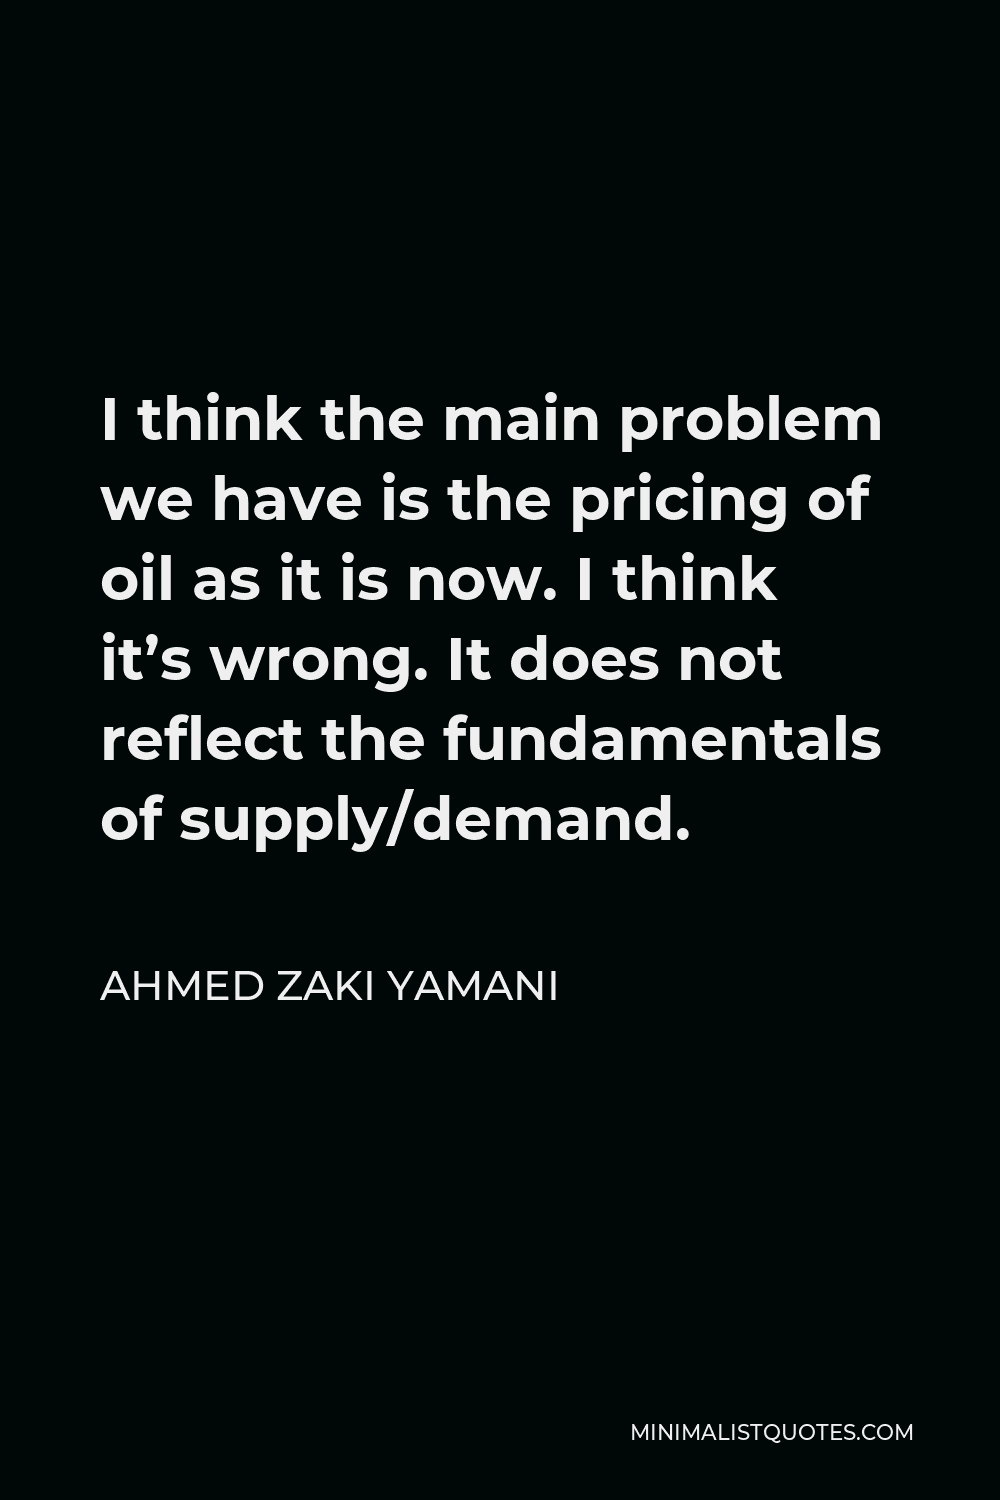 Ahmed Zaki Yamani Quote - I think the main problem we have is the pricing of oil as it is now. I think it’s wrong. It does not reflect the fundamentals of supply/demand.